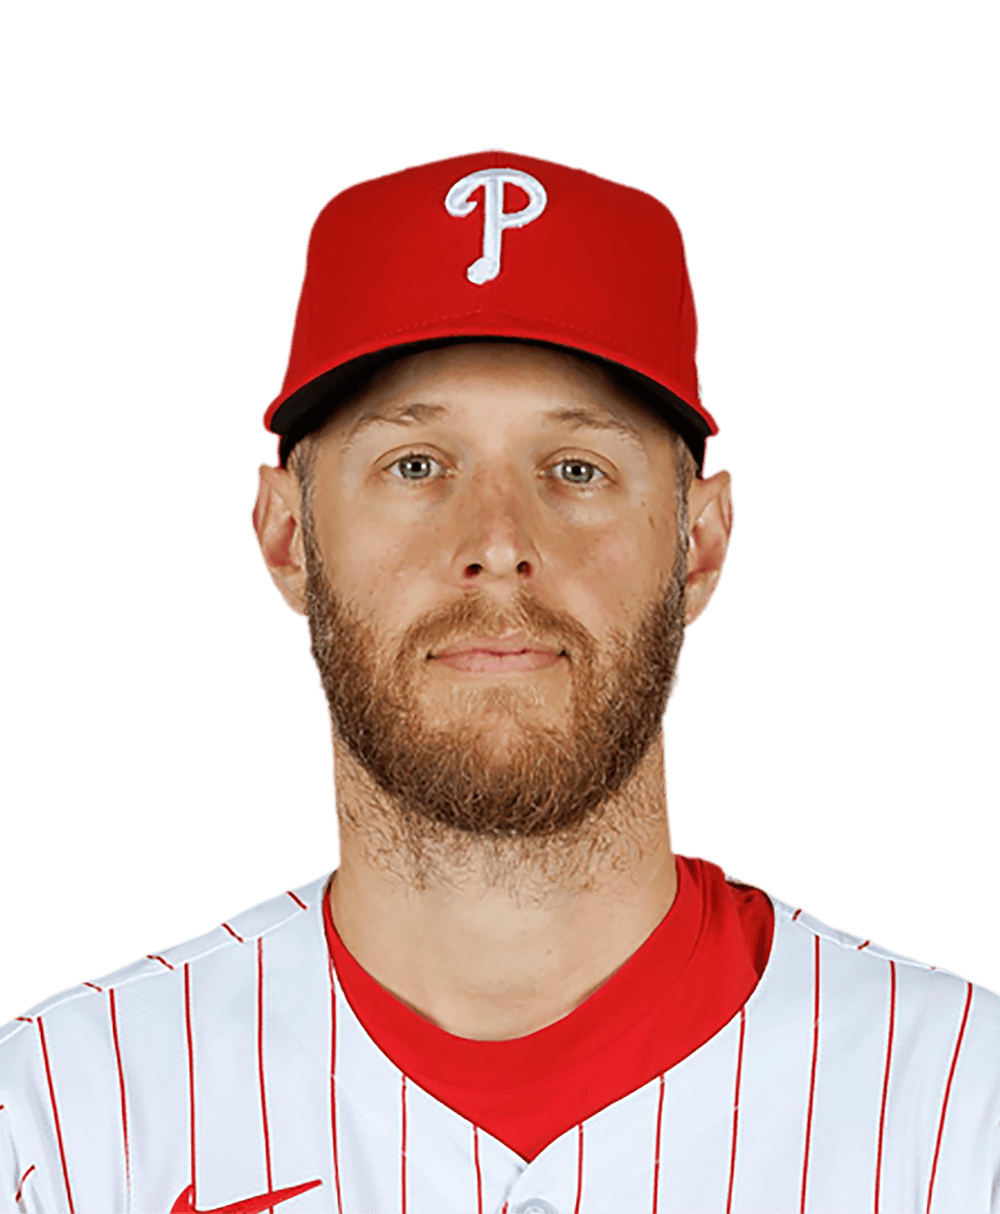 Zack Wheeler blossoms into ace for Phillies, gets Game 1 start